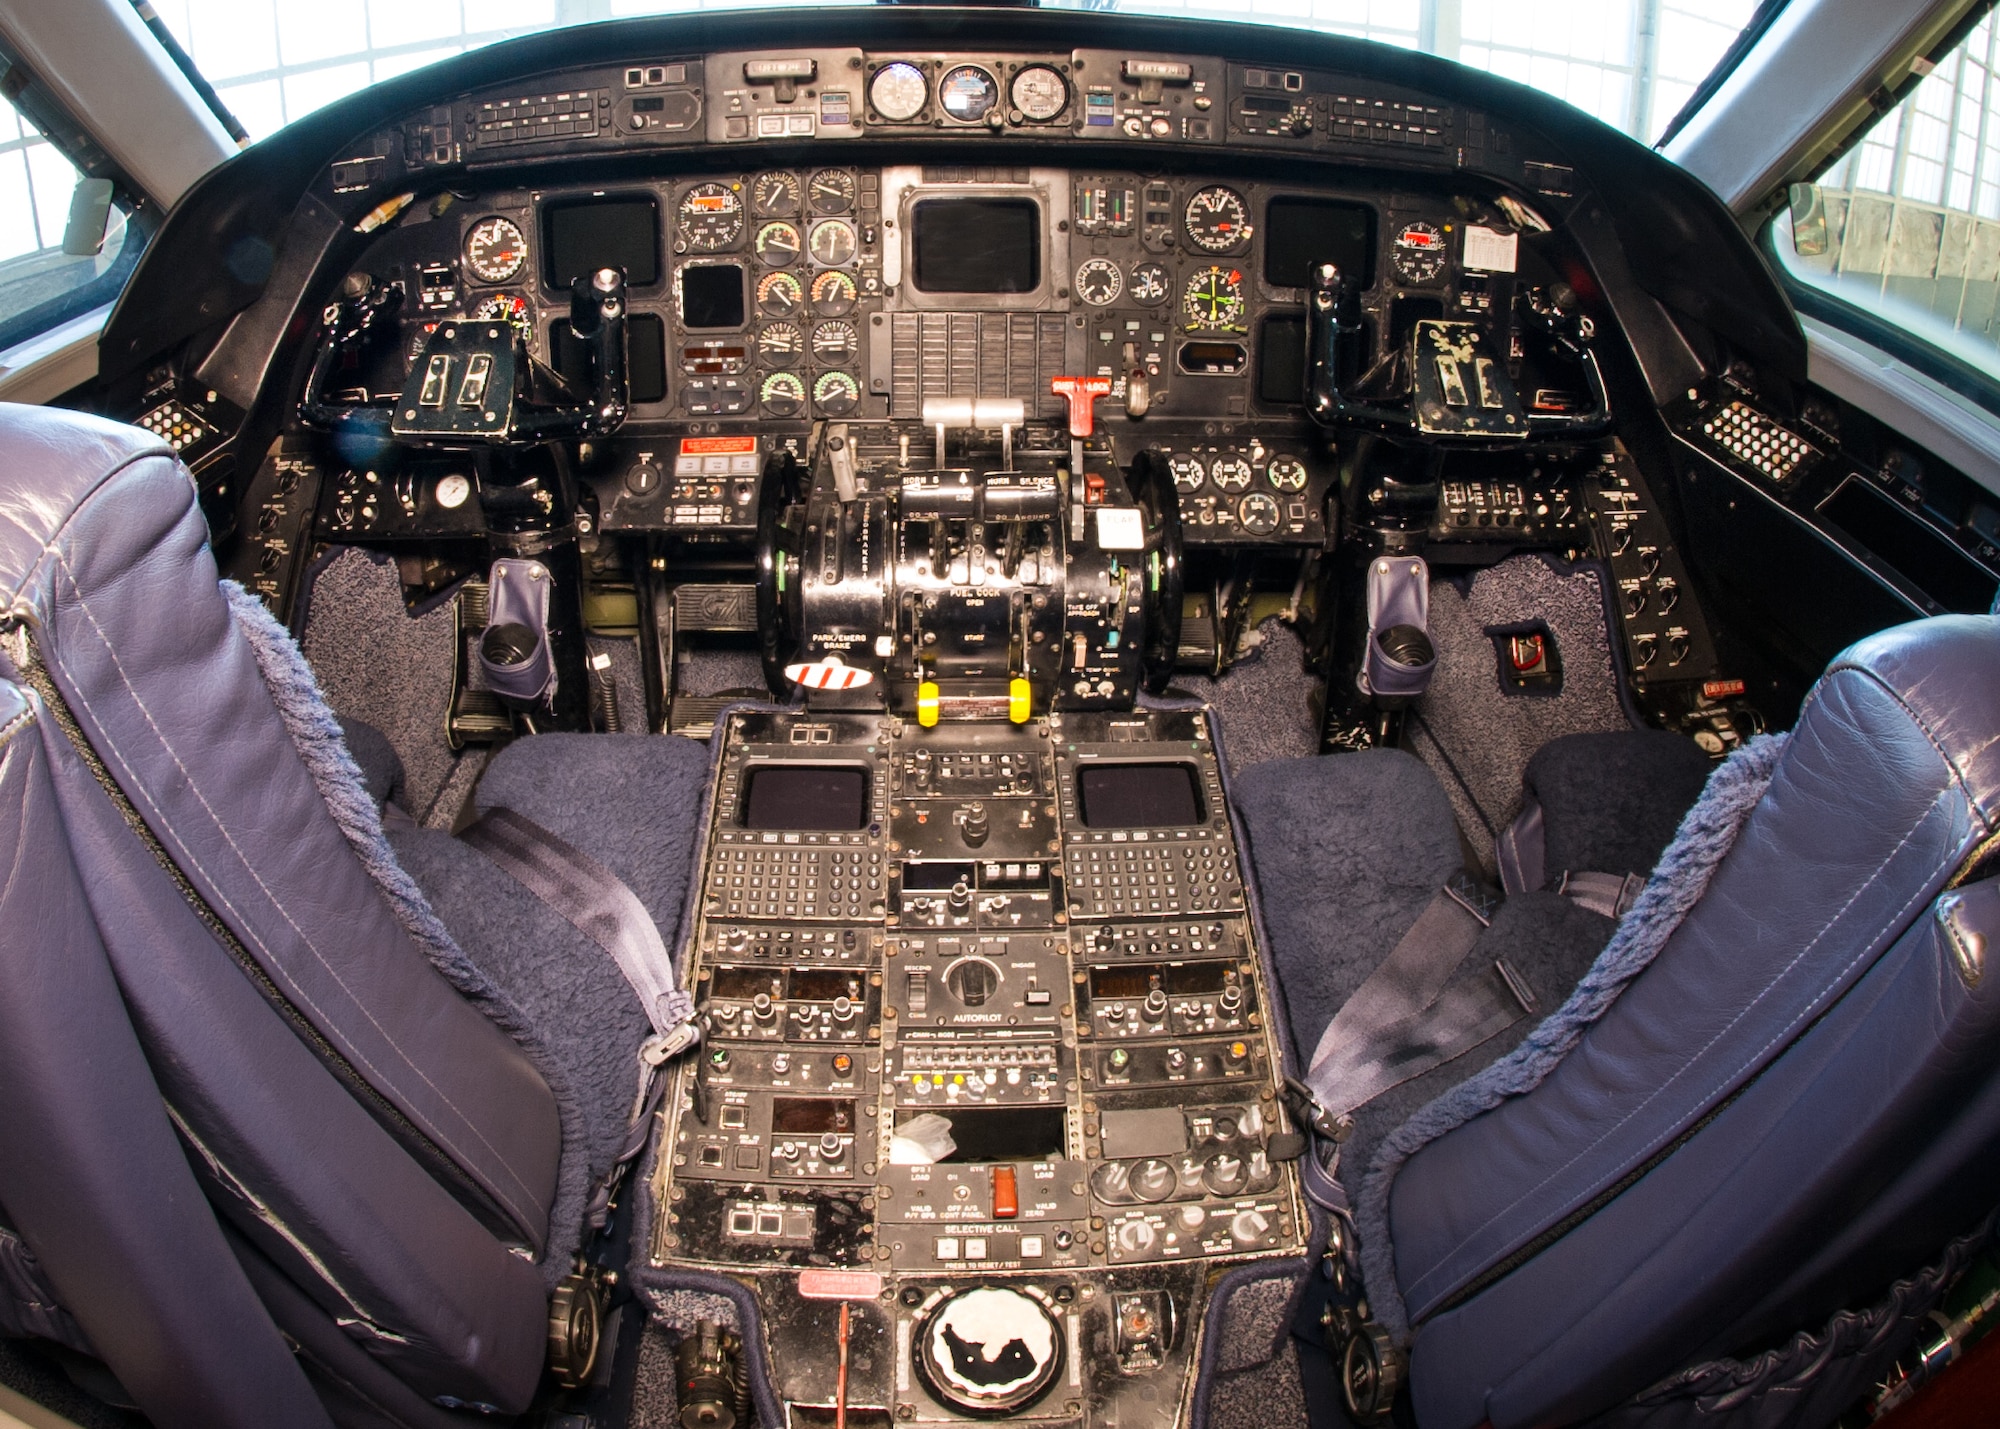 DAYTON, Ohio -- Gulfstream Aerospace C-20B cockpit view in the Presidential Gallery at the National Museum of the United States Air Force. (U.S. Air Force photo by Ken LaRock)